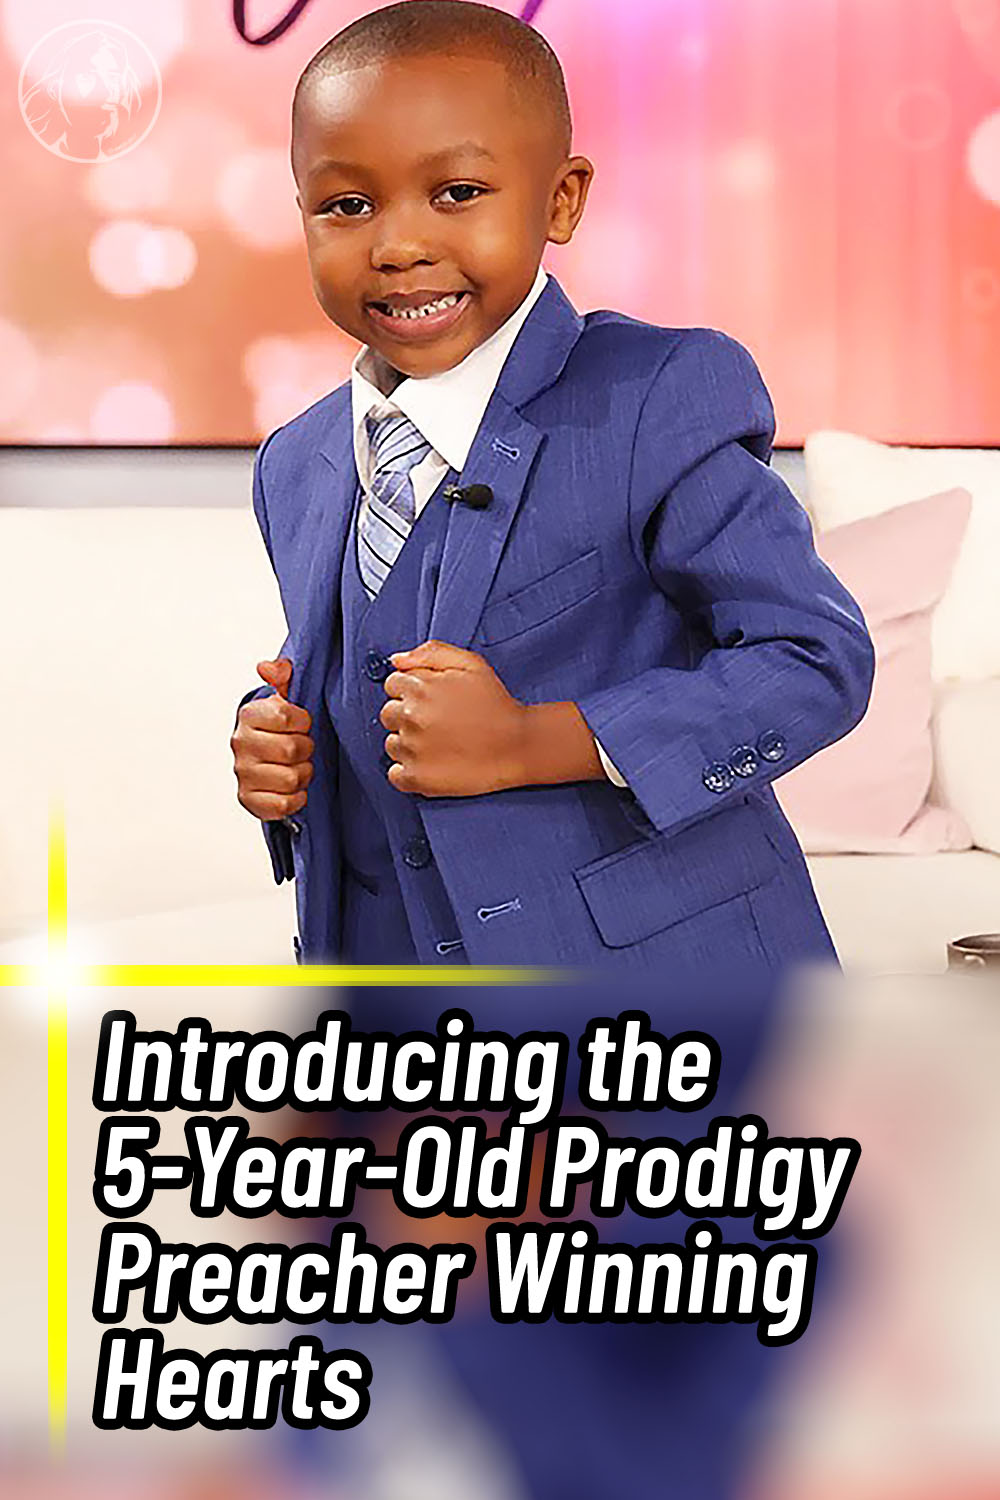 Introducing the 5-Year-Old Prodigy Preacher Winning Hearts